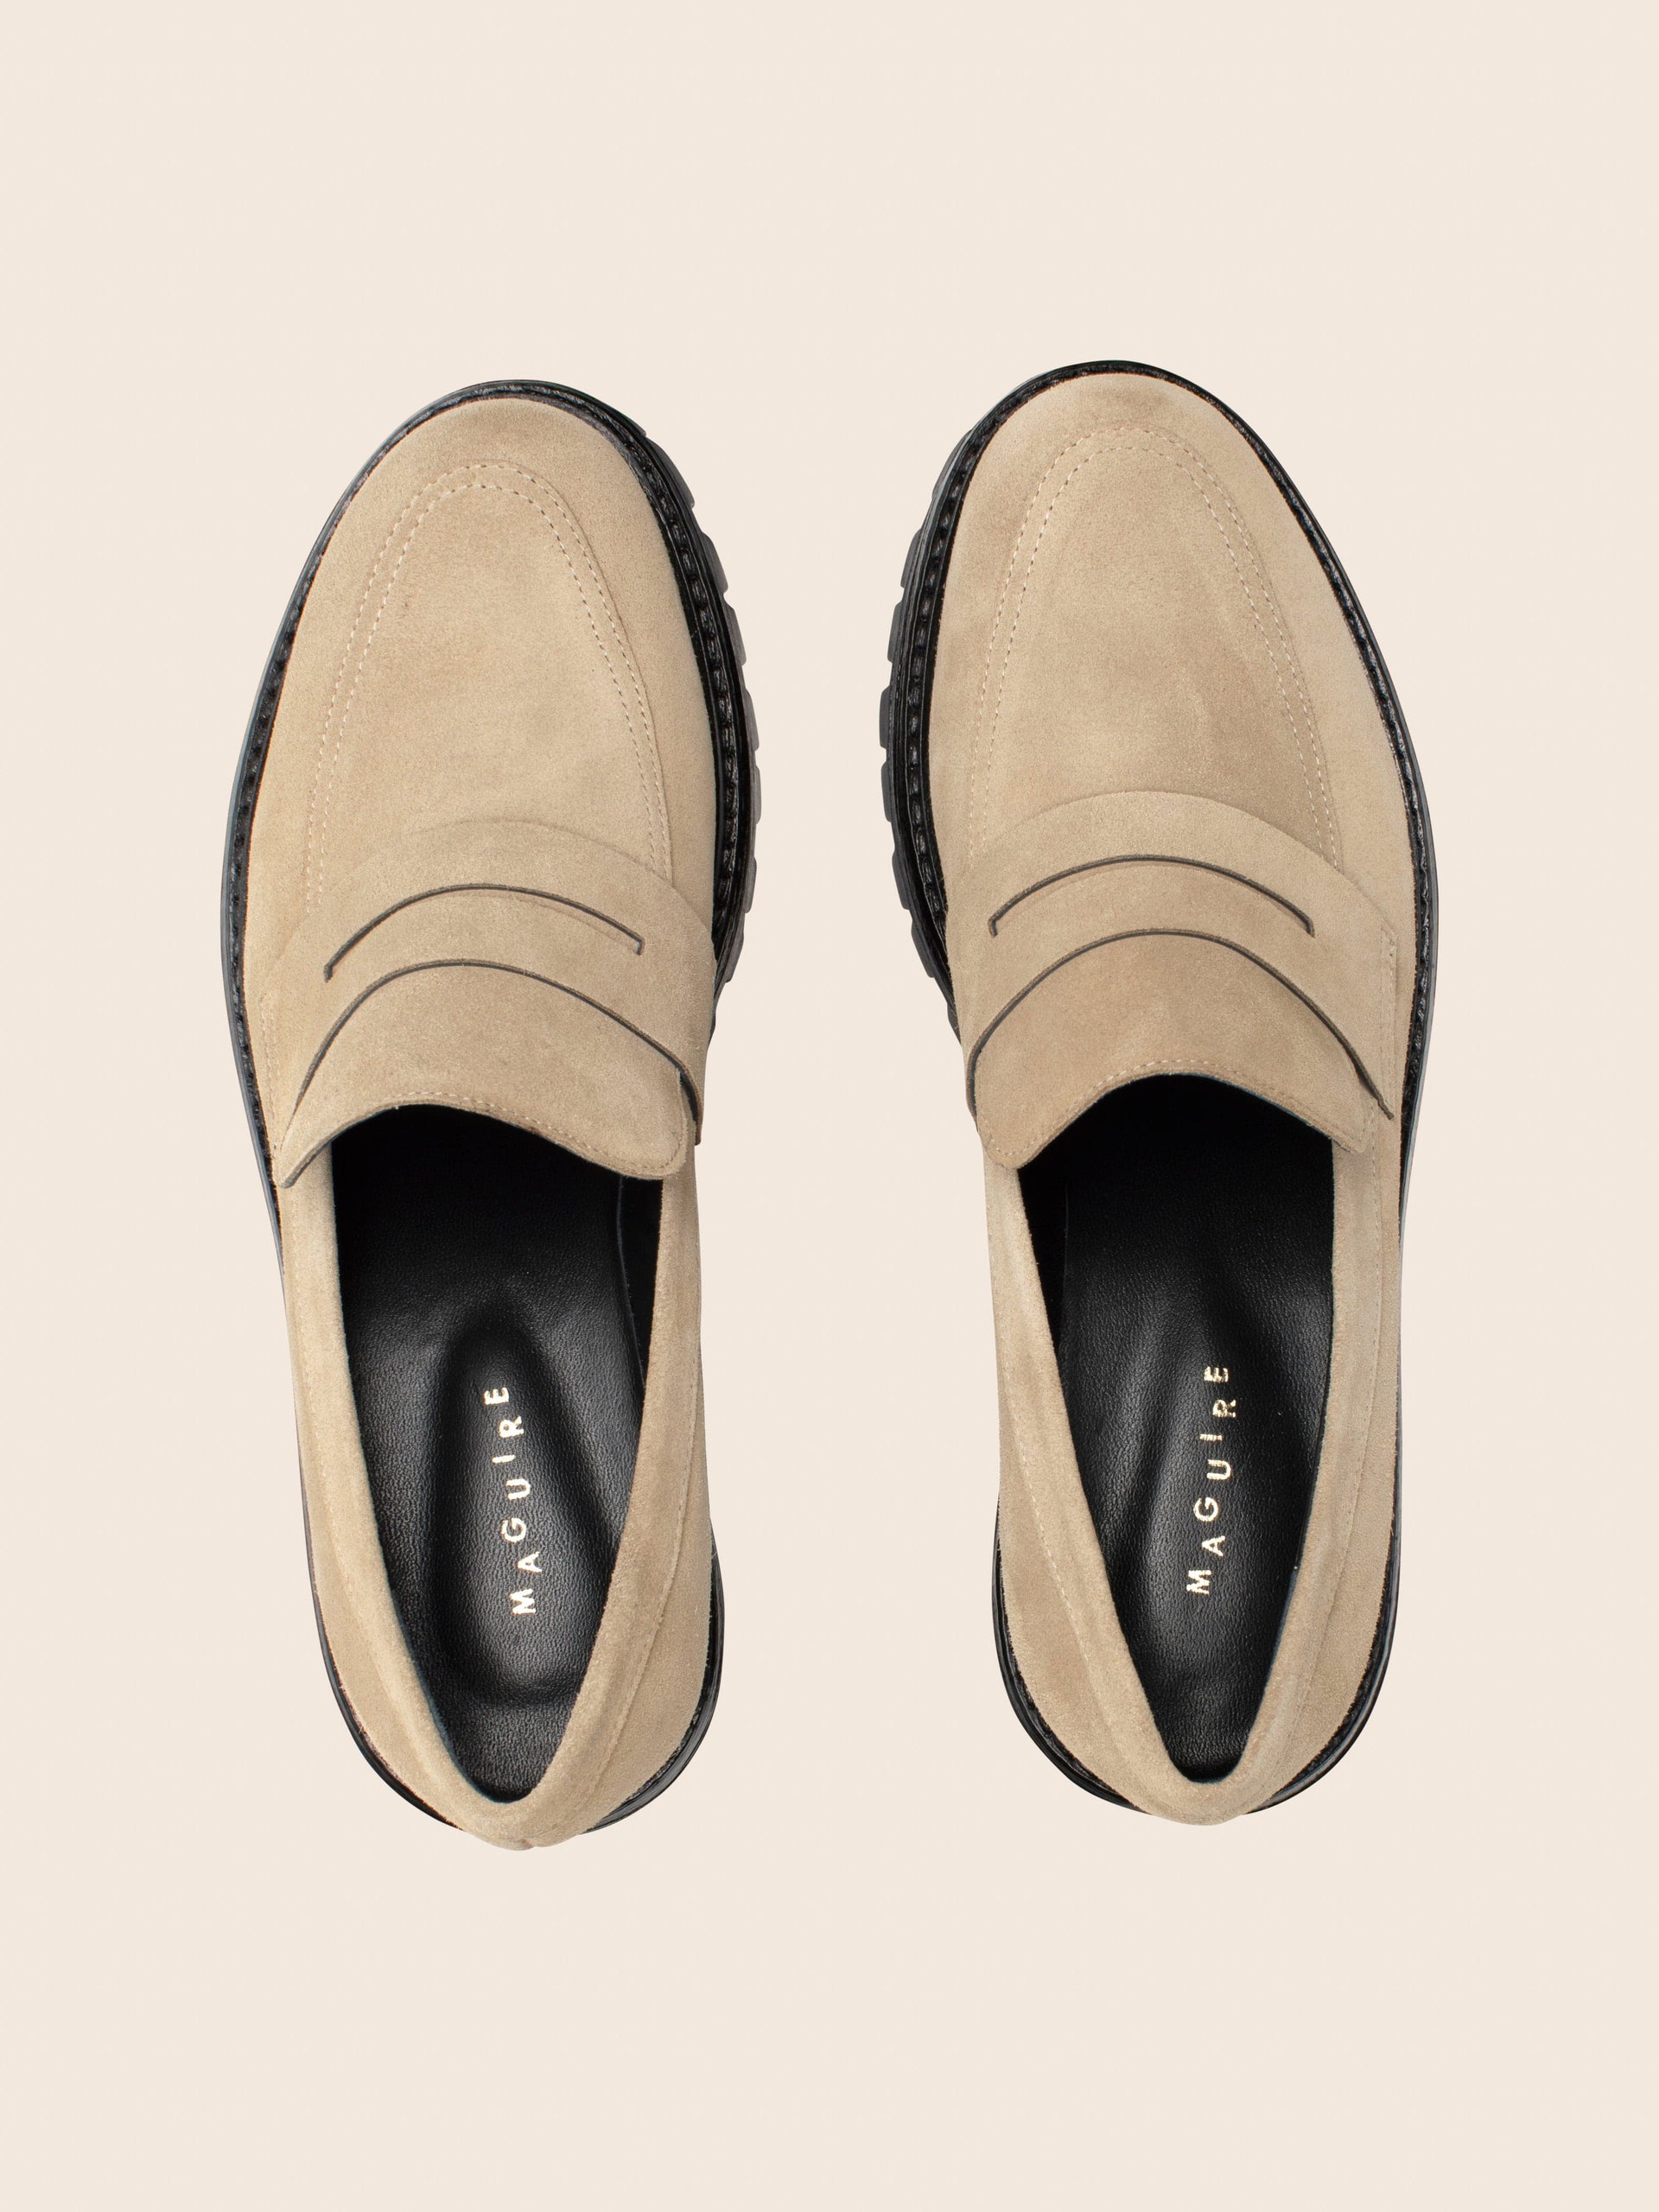 Maguire Sintra Loafer Penny Suède - Sable